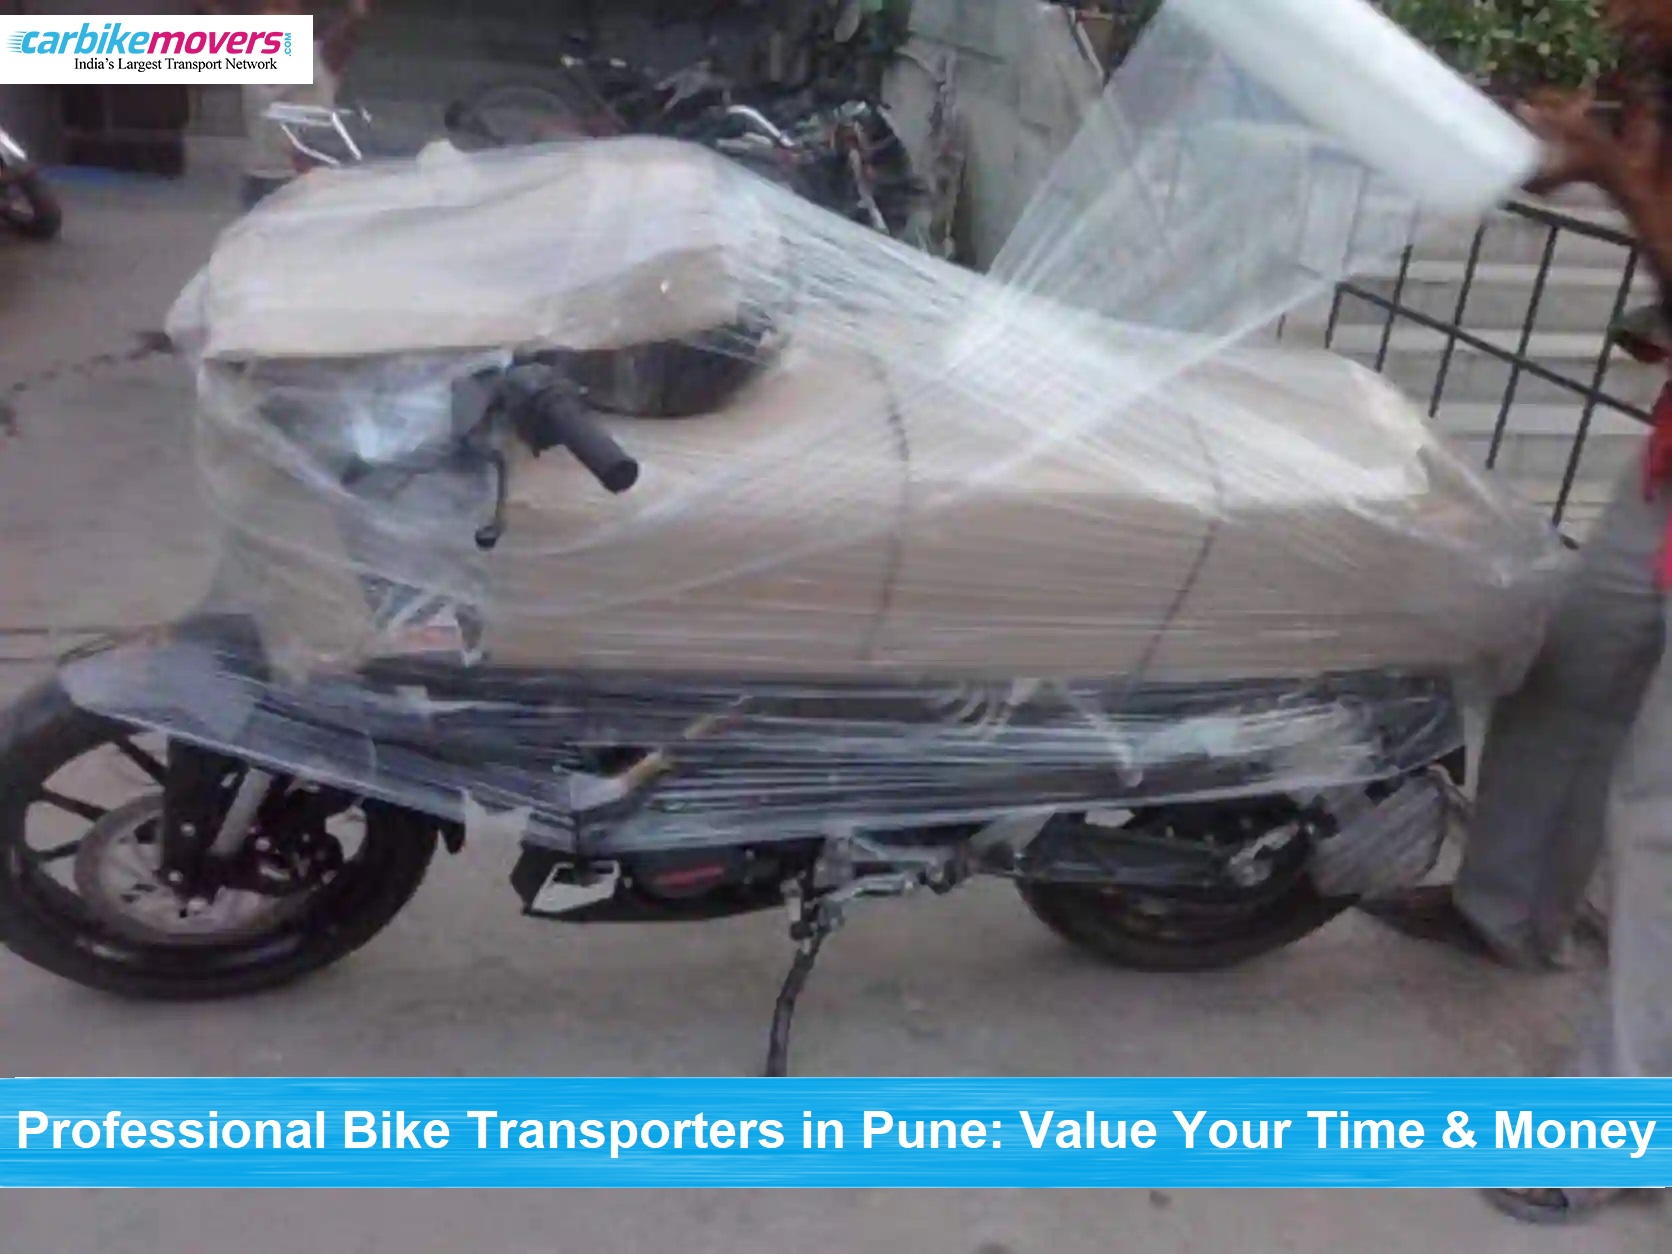 Hire Professional Bike Transporters in Pune - Value Your Time and Money